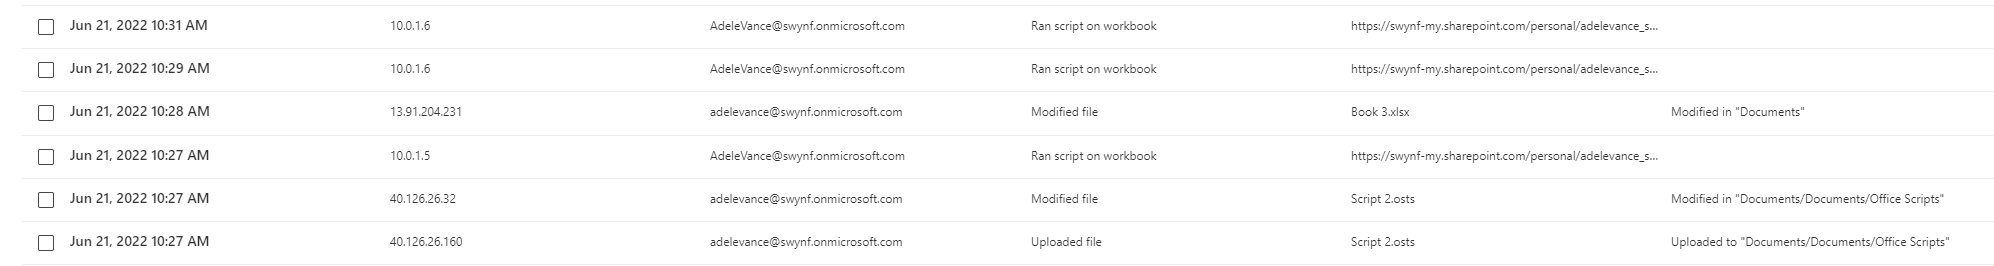 A few rows of audit log search results, including the 'Ran script on workbook' action and the upload and modification of an .osts file.